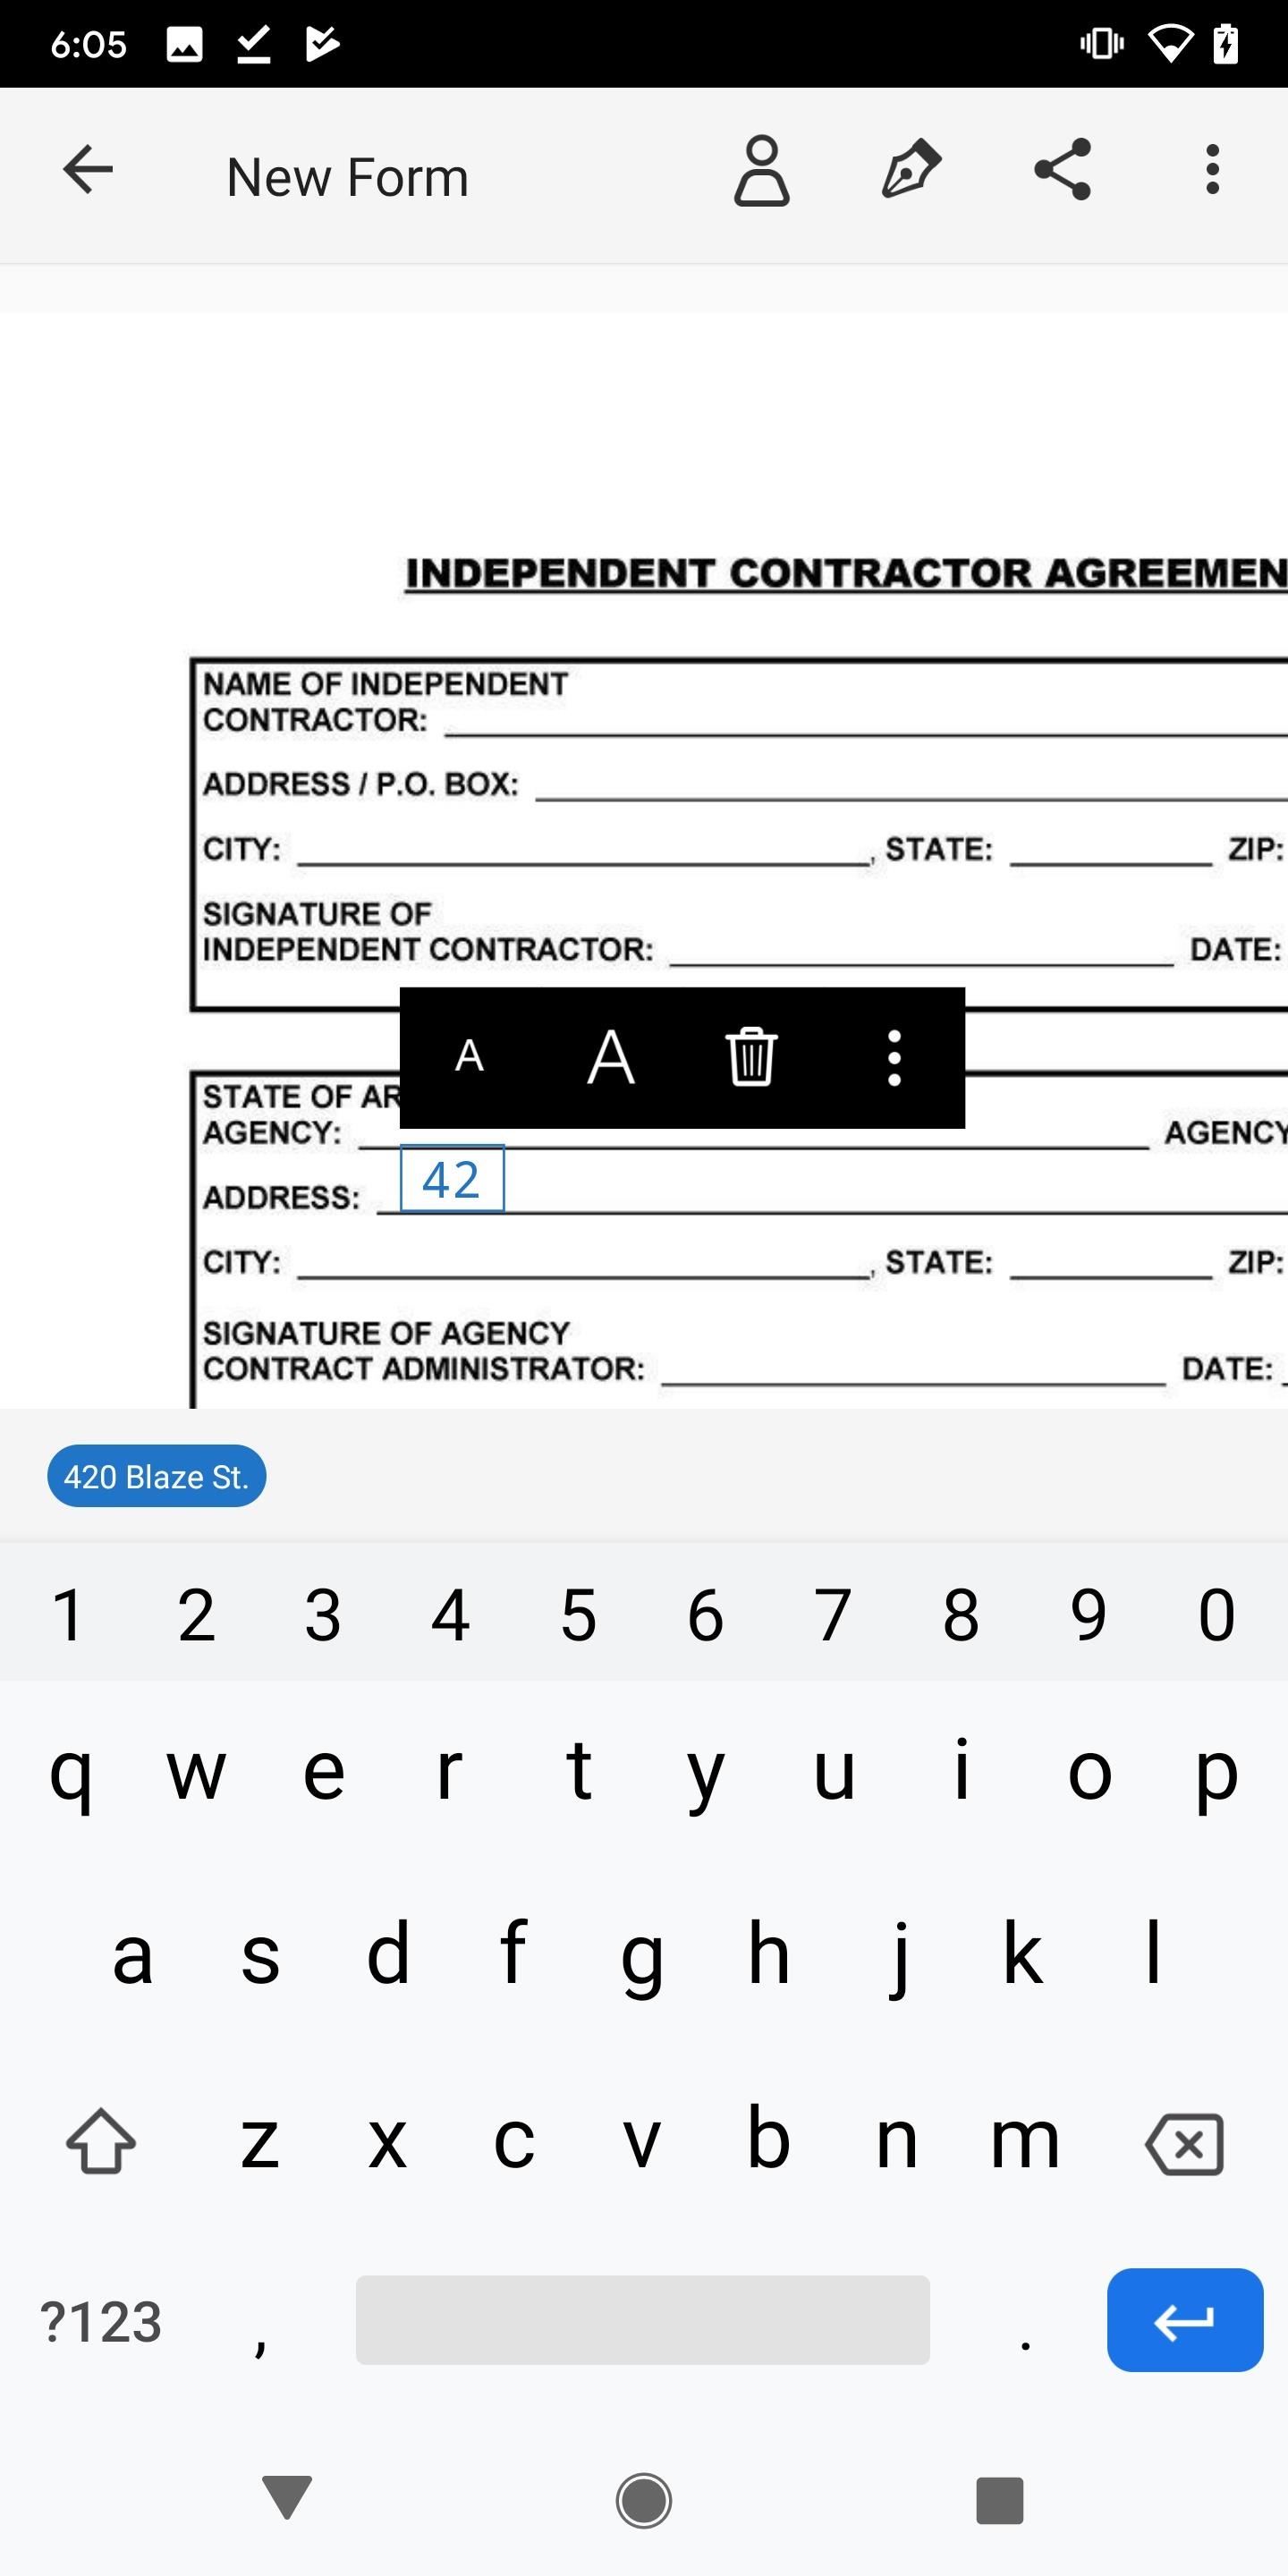 Use Adobe Fill & Sign to Electronically Fill Out & Sign Important Forms on Android or iOS